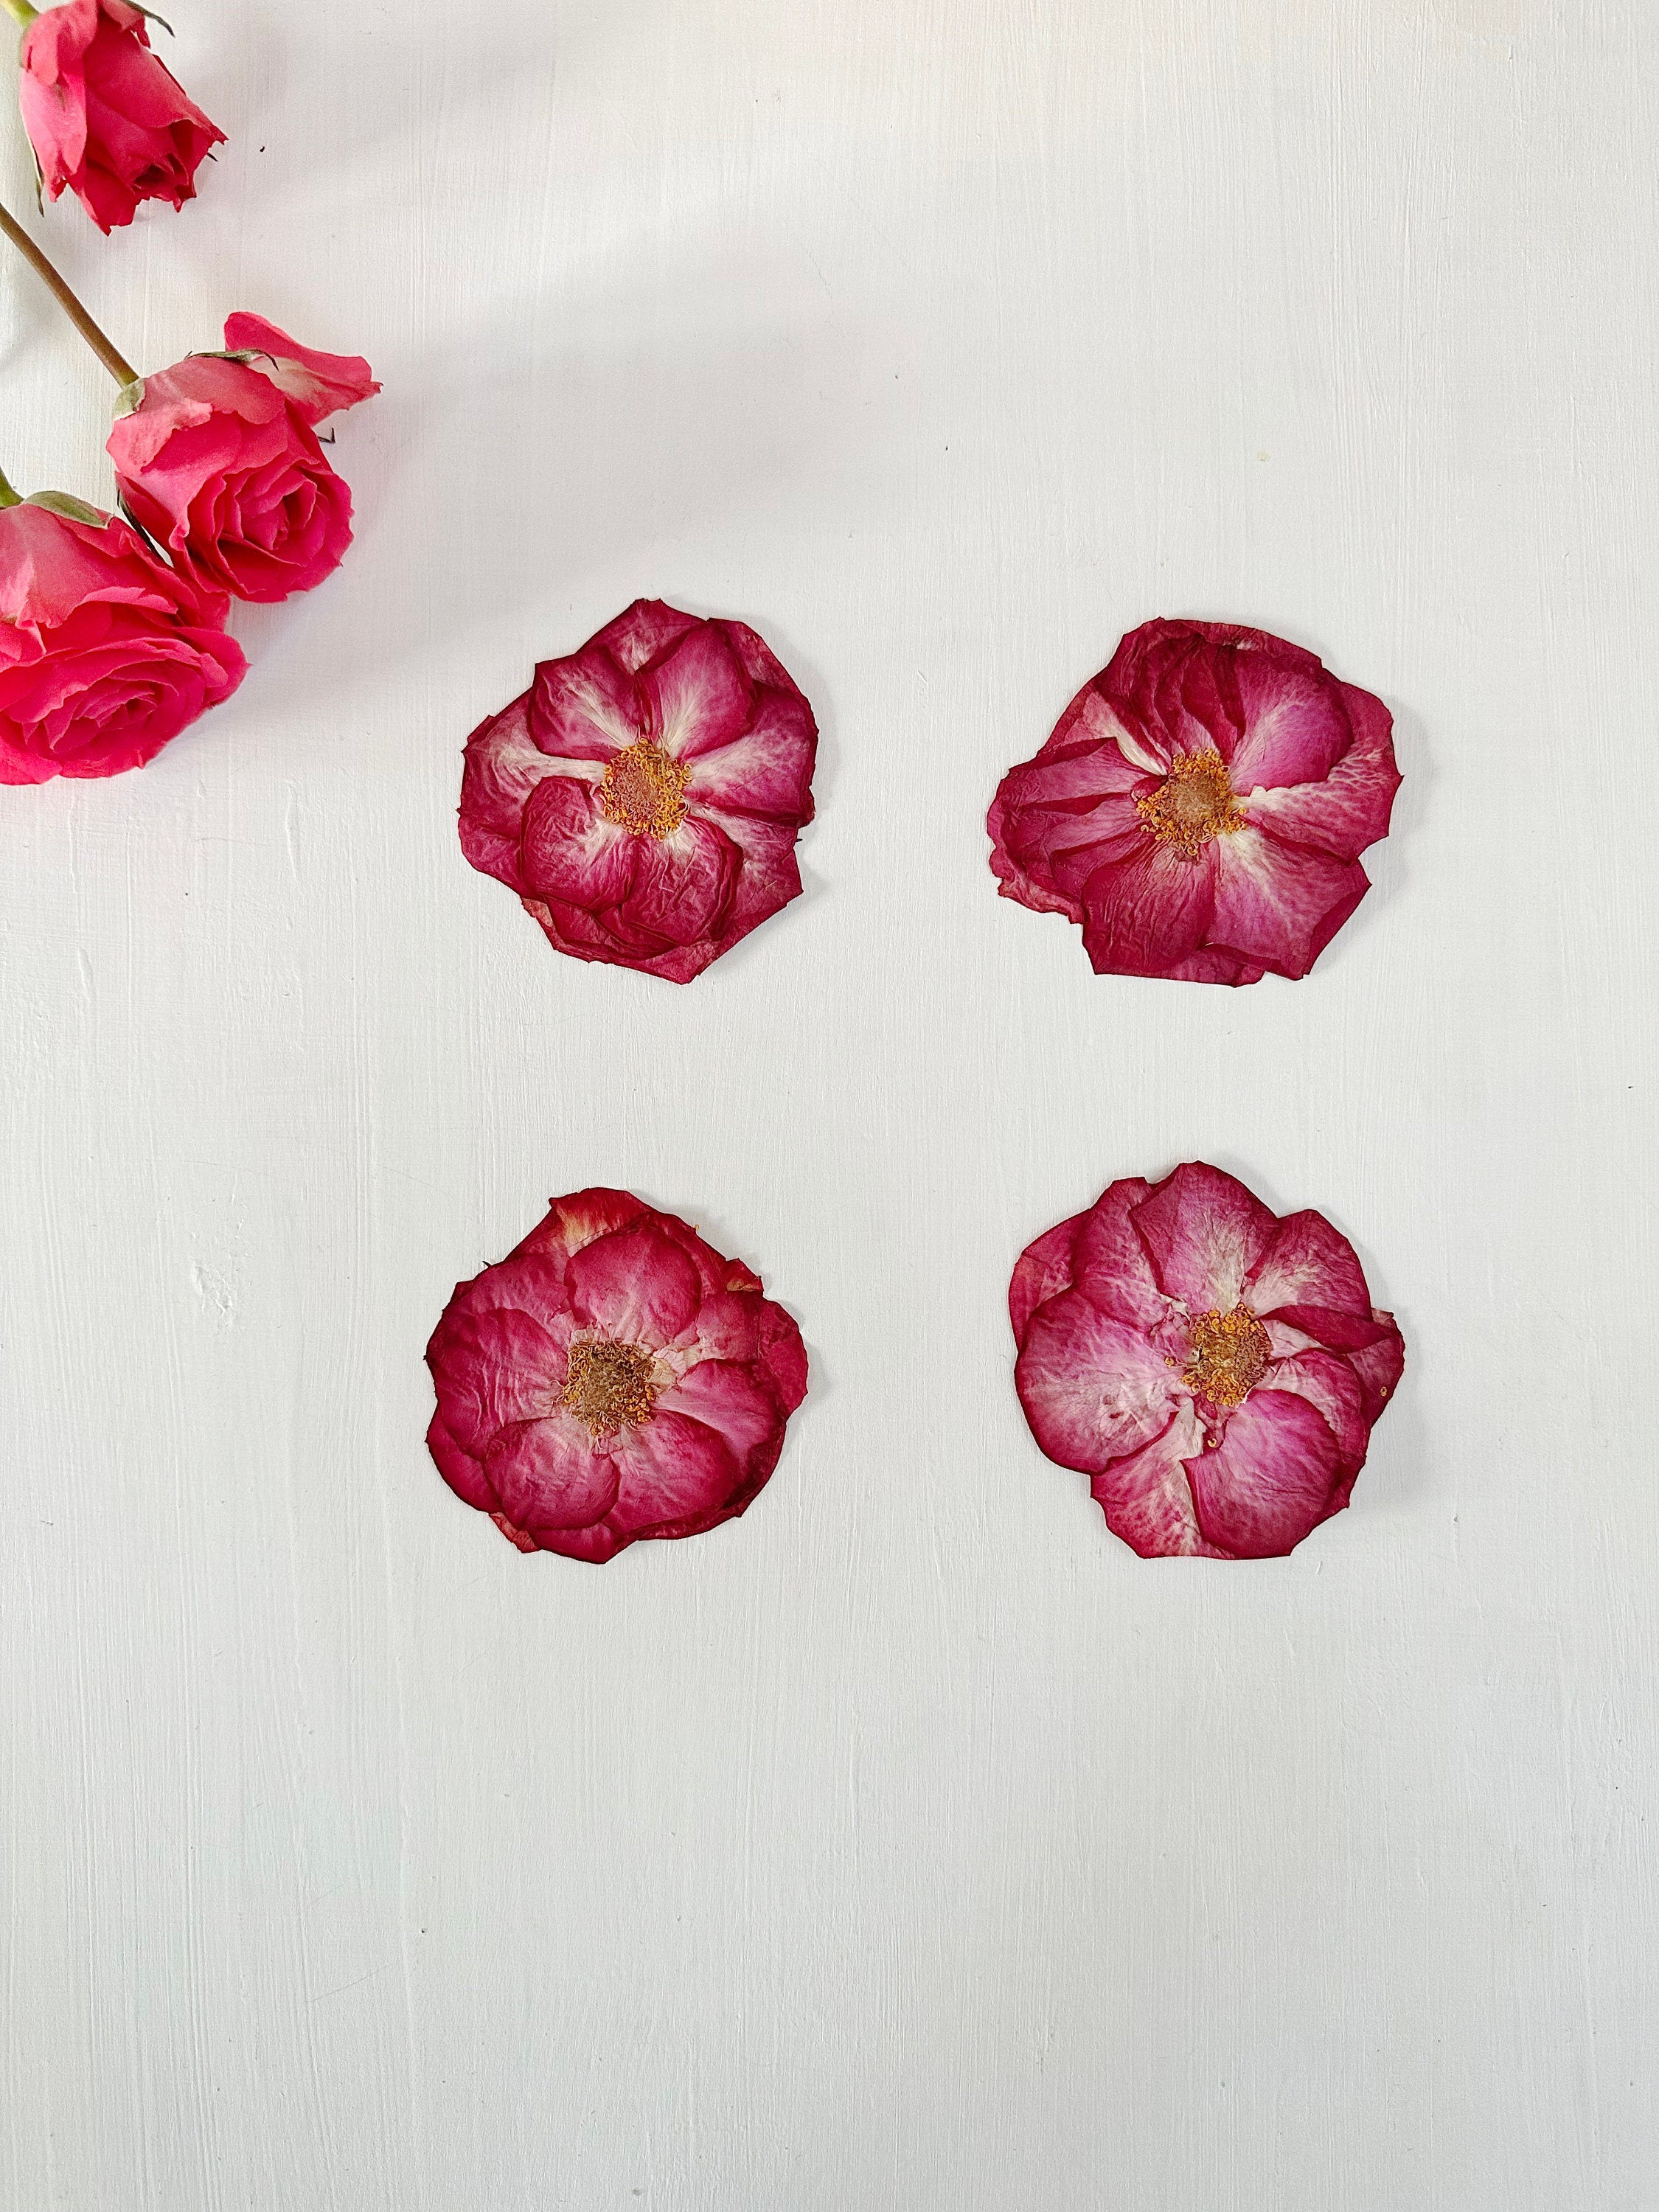 20 PCS Set Pressed Pink Flowers, Real Dried Pressed Flowers, Real Pink  Flower Stems, Preserved Pink Flat Flowers, Pressed Dry Flower Stems 